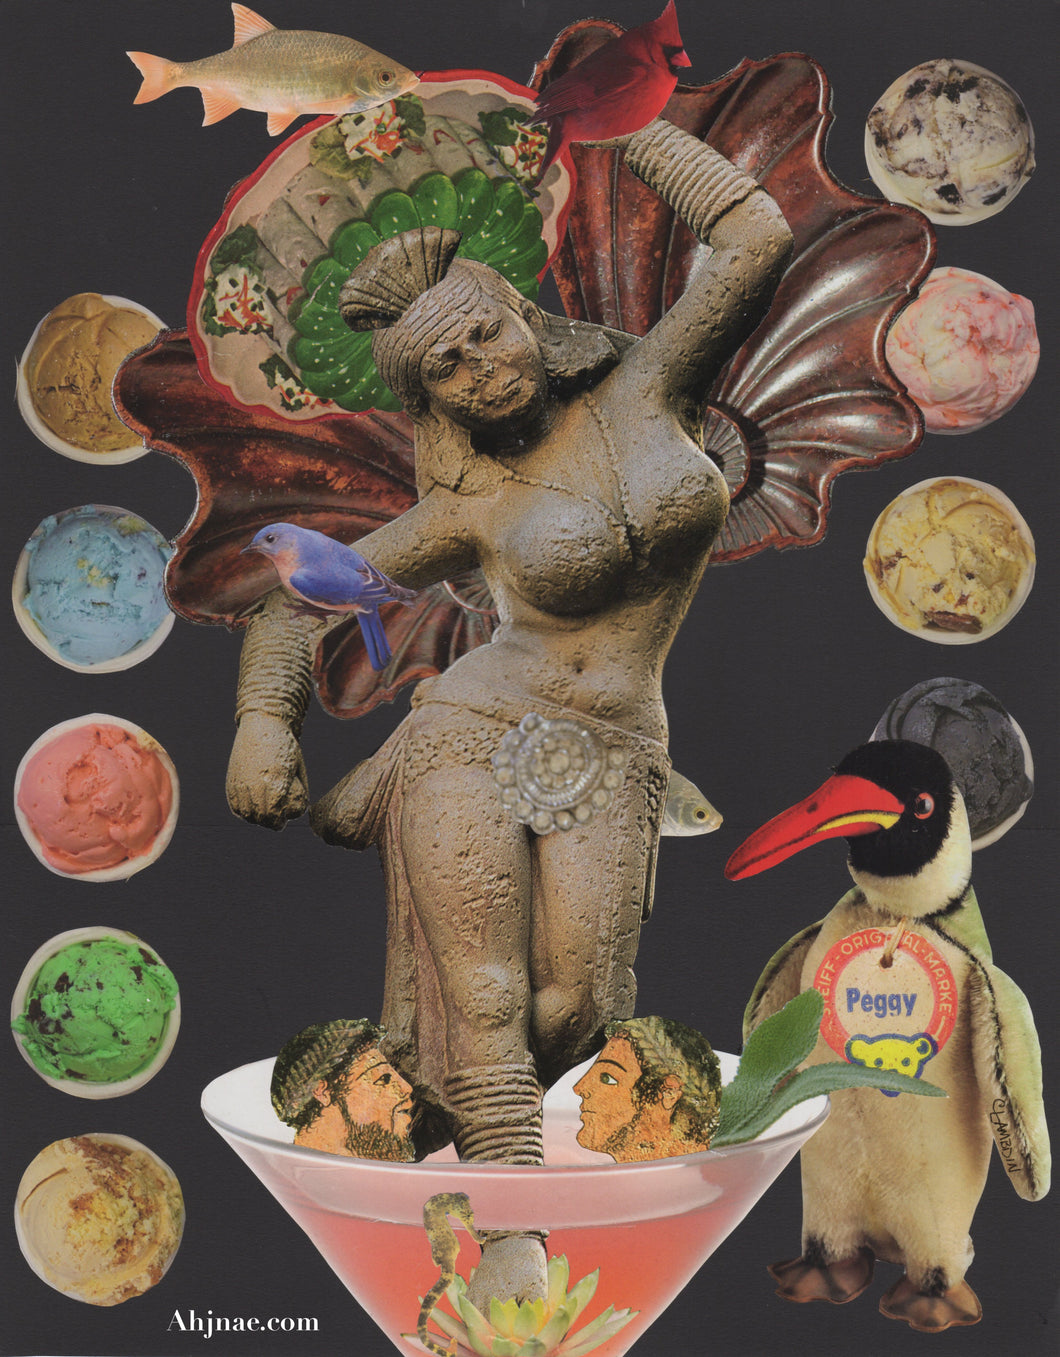 I love this eclectic collage! The Goddess of fertility 